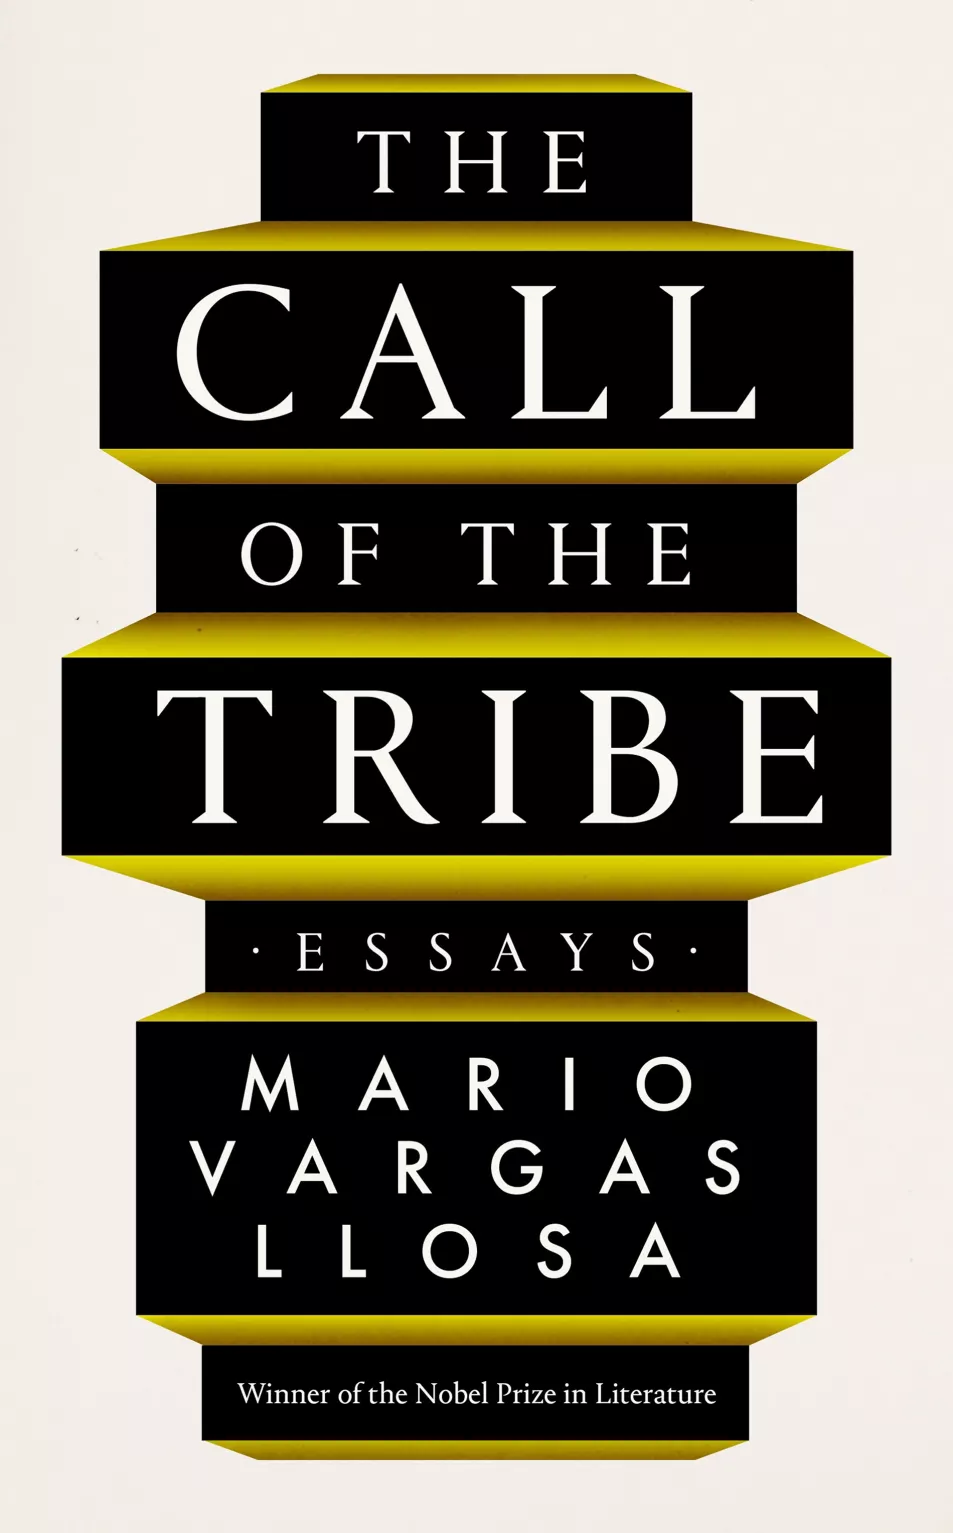 The Call Of The Tribe: Essays by Mario Vargas Llosa